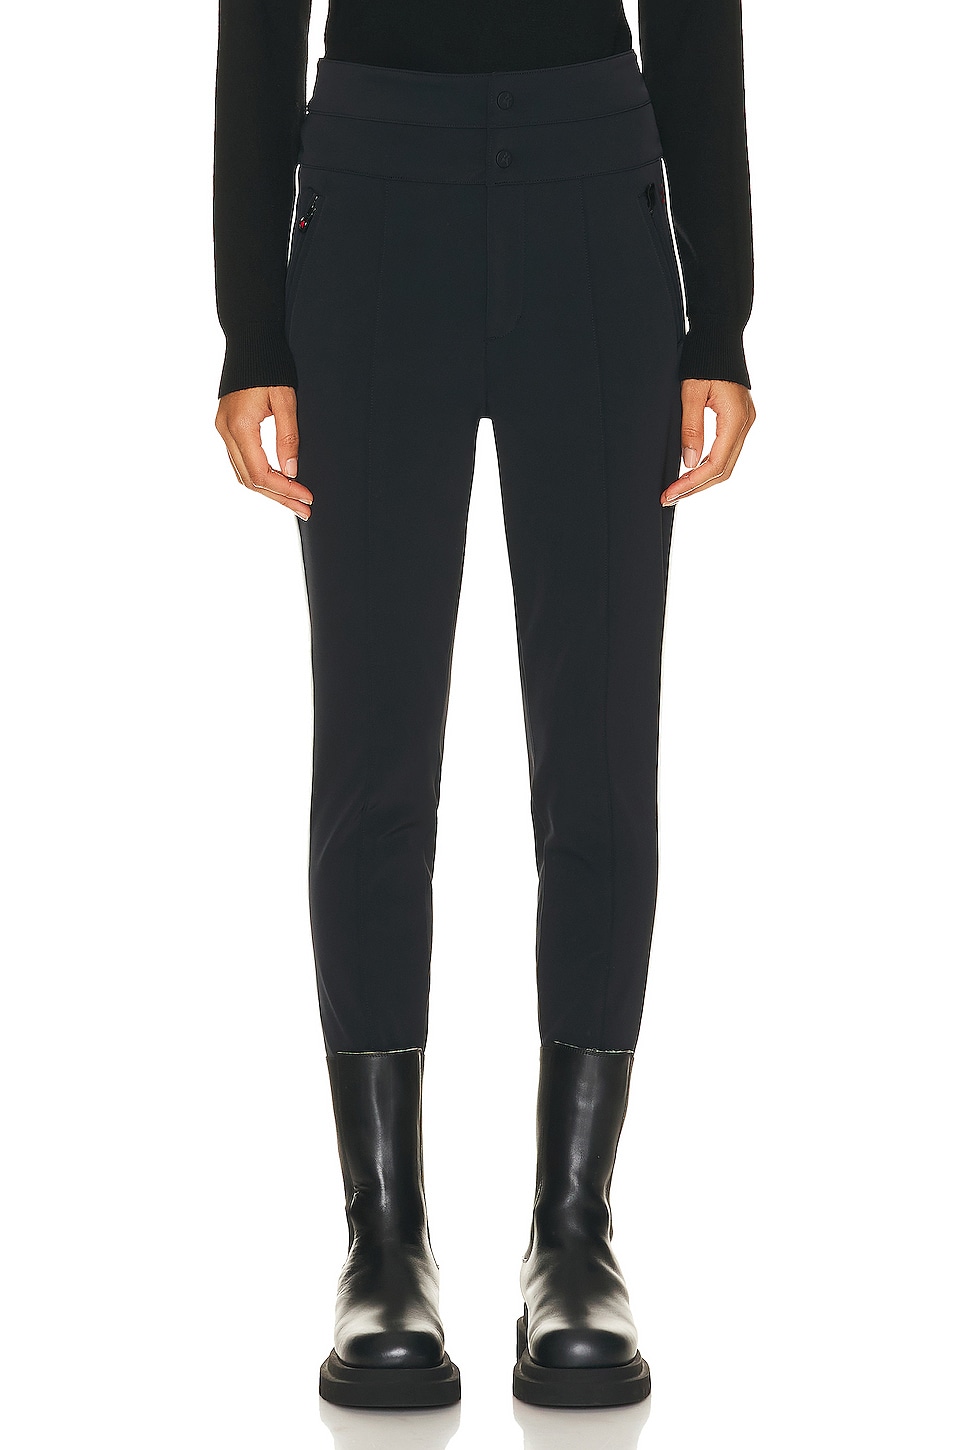 Image 1 of Perfect Moment Aurora Skinny Race Pant in Black